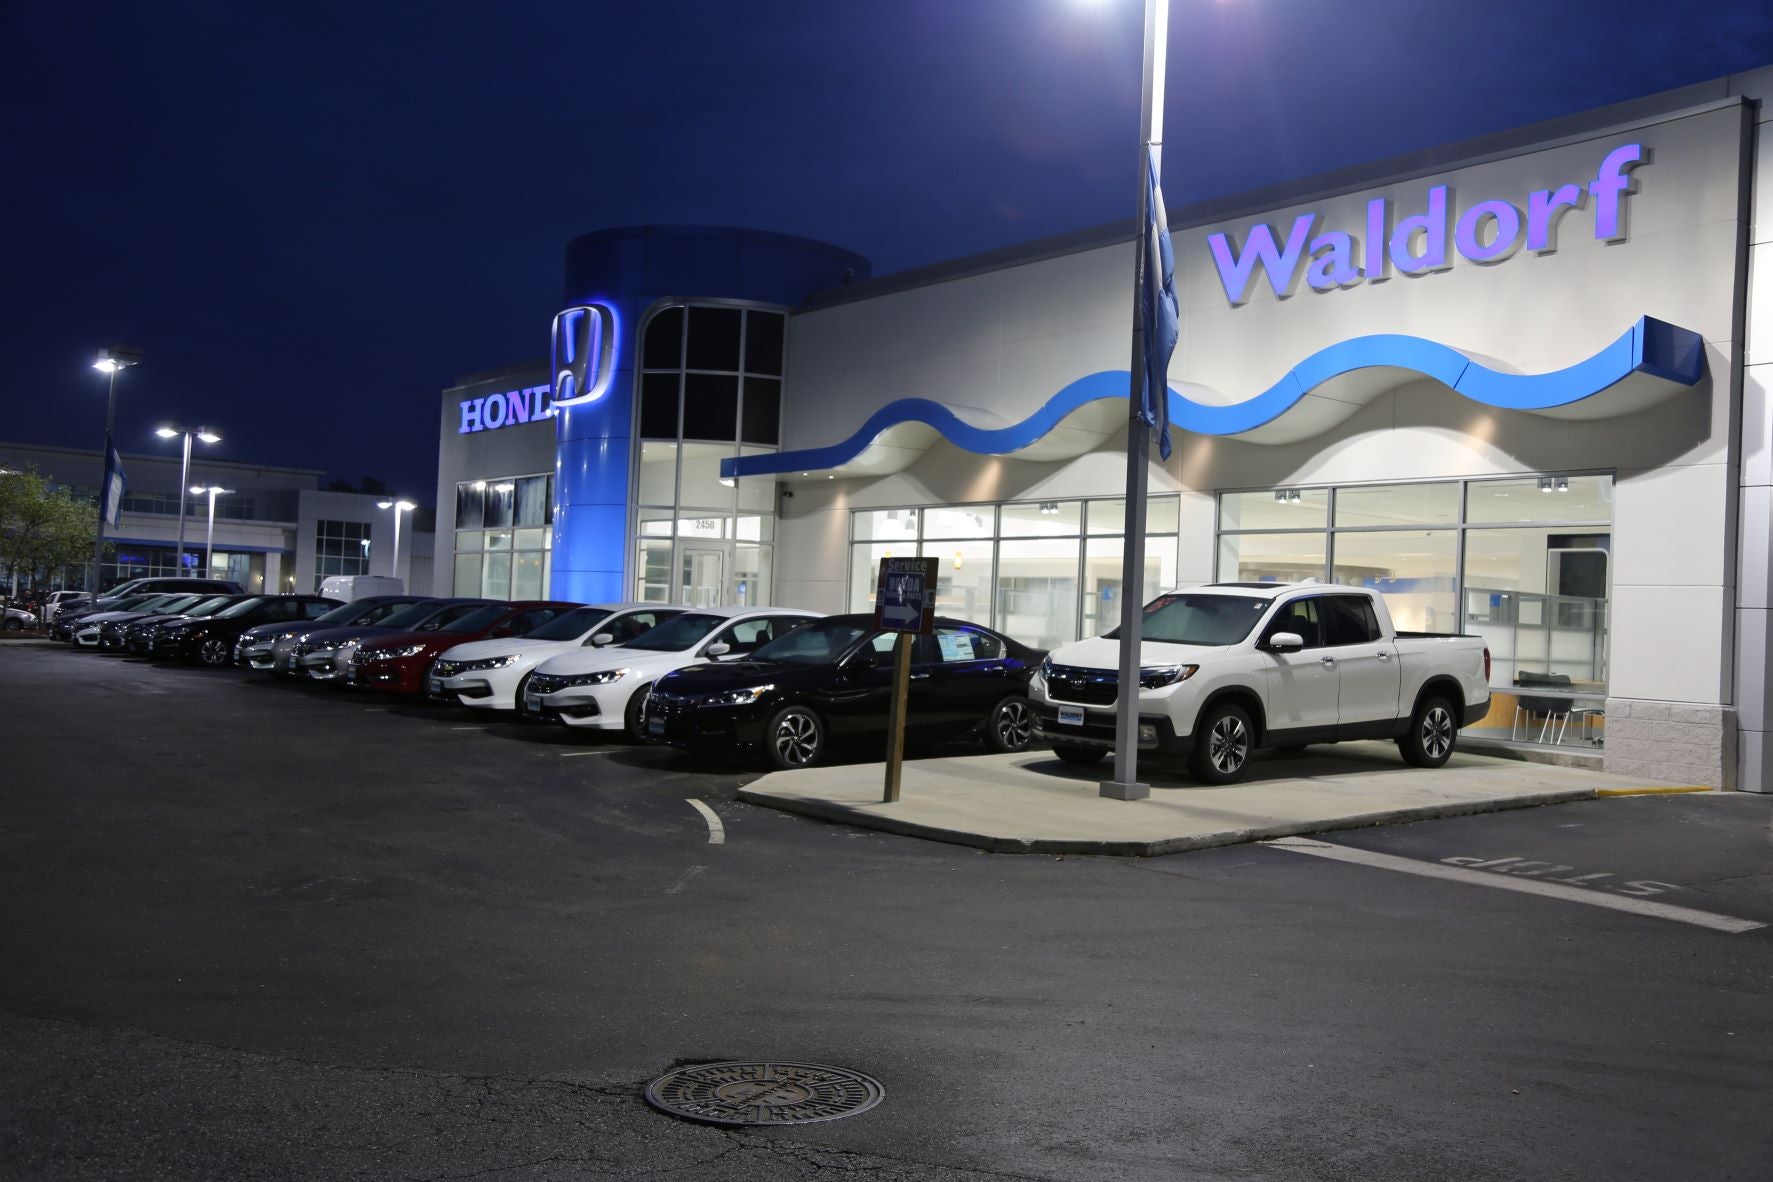 Used Cars For Sale in Waldorf, MD